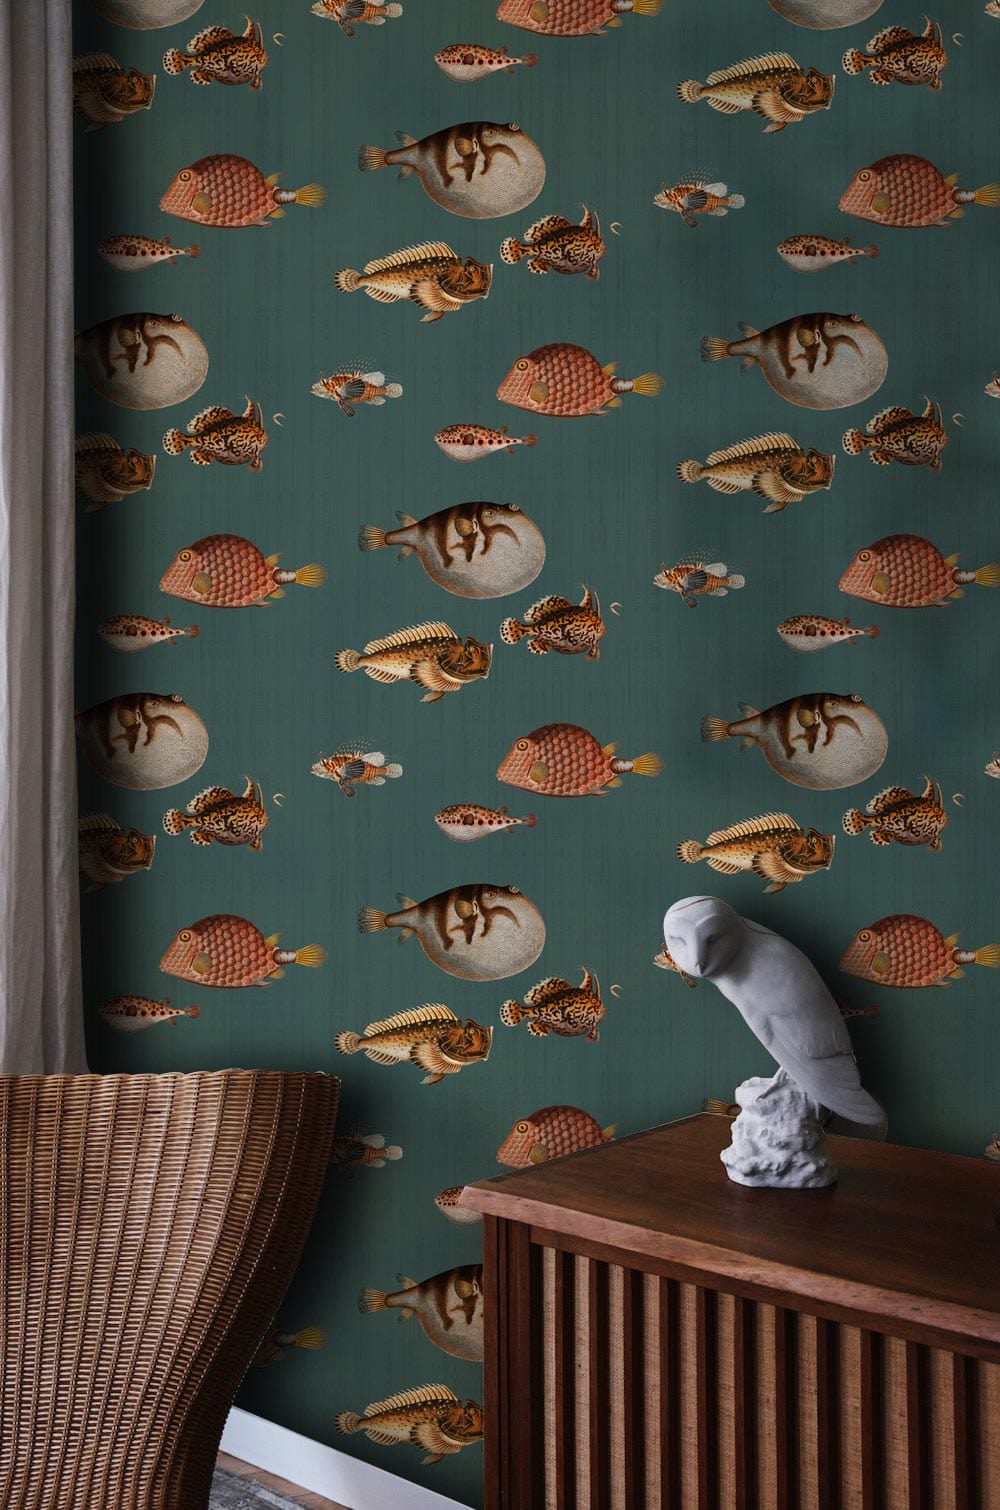 unique marine fishes gathering wall mural art